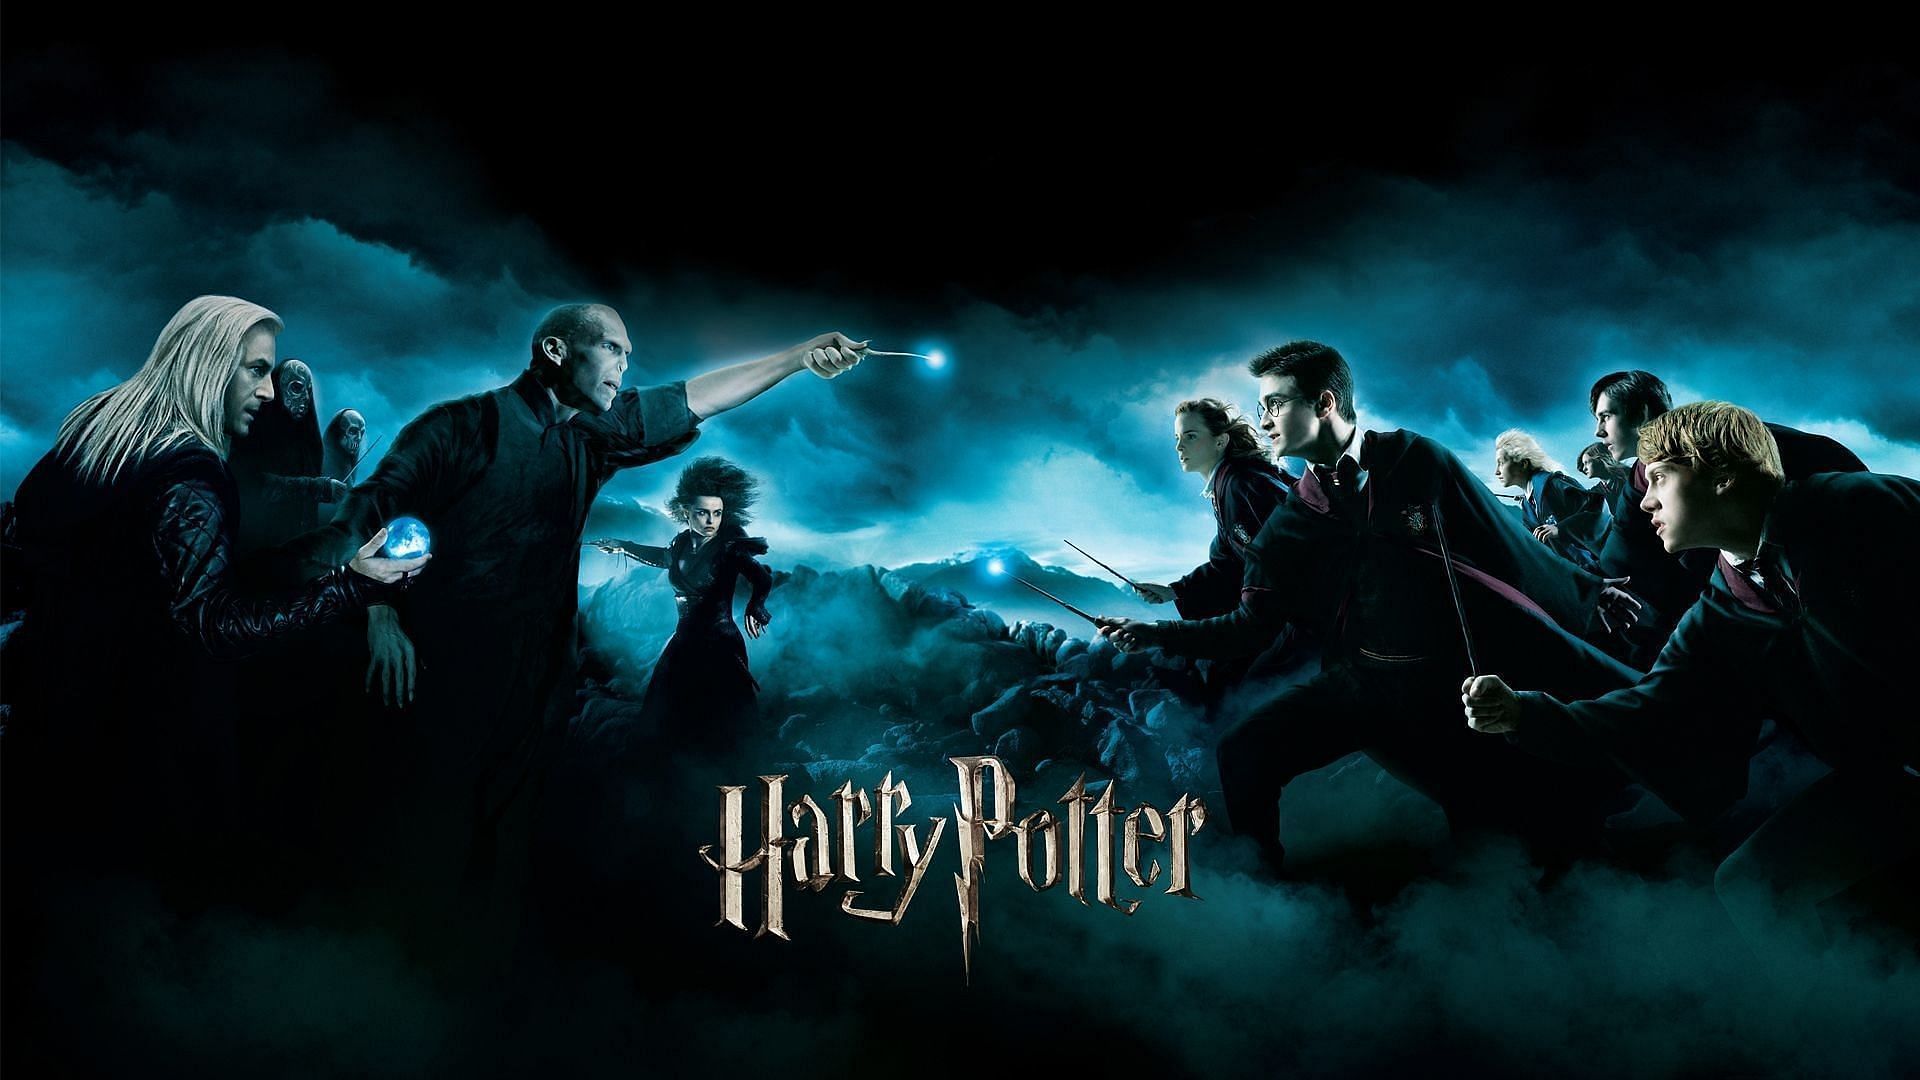 A poster of Harry Potter and the Deathly Hallows Part II (Image via WB)